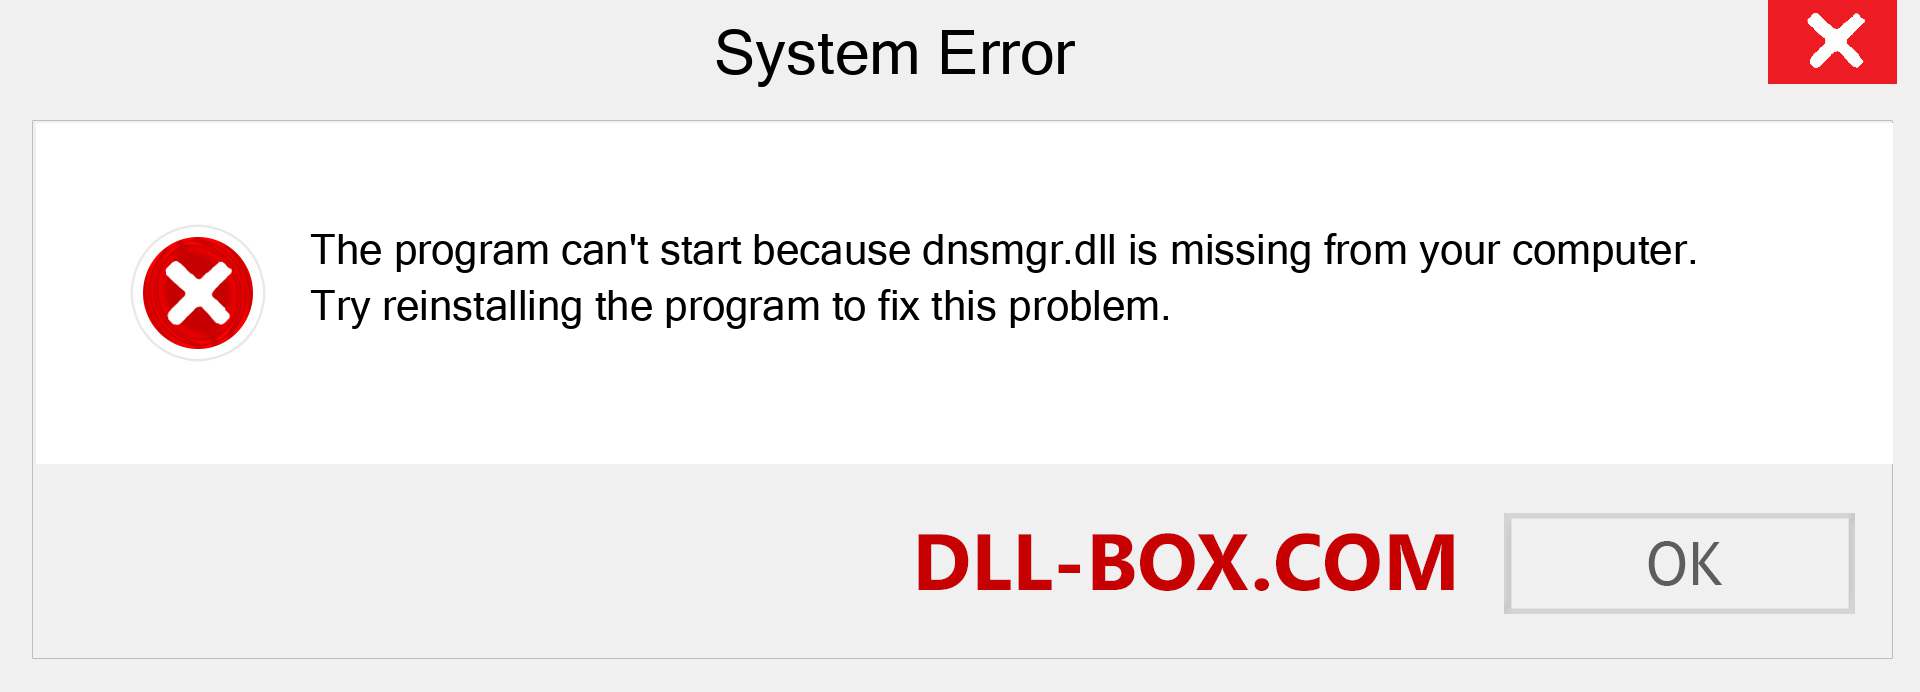  dnsmgr.dll file is missing?. Download for Windows 7, 8, 10 - Fix  dnsmgr dll Missing Error on Windows, photos, images